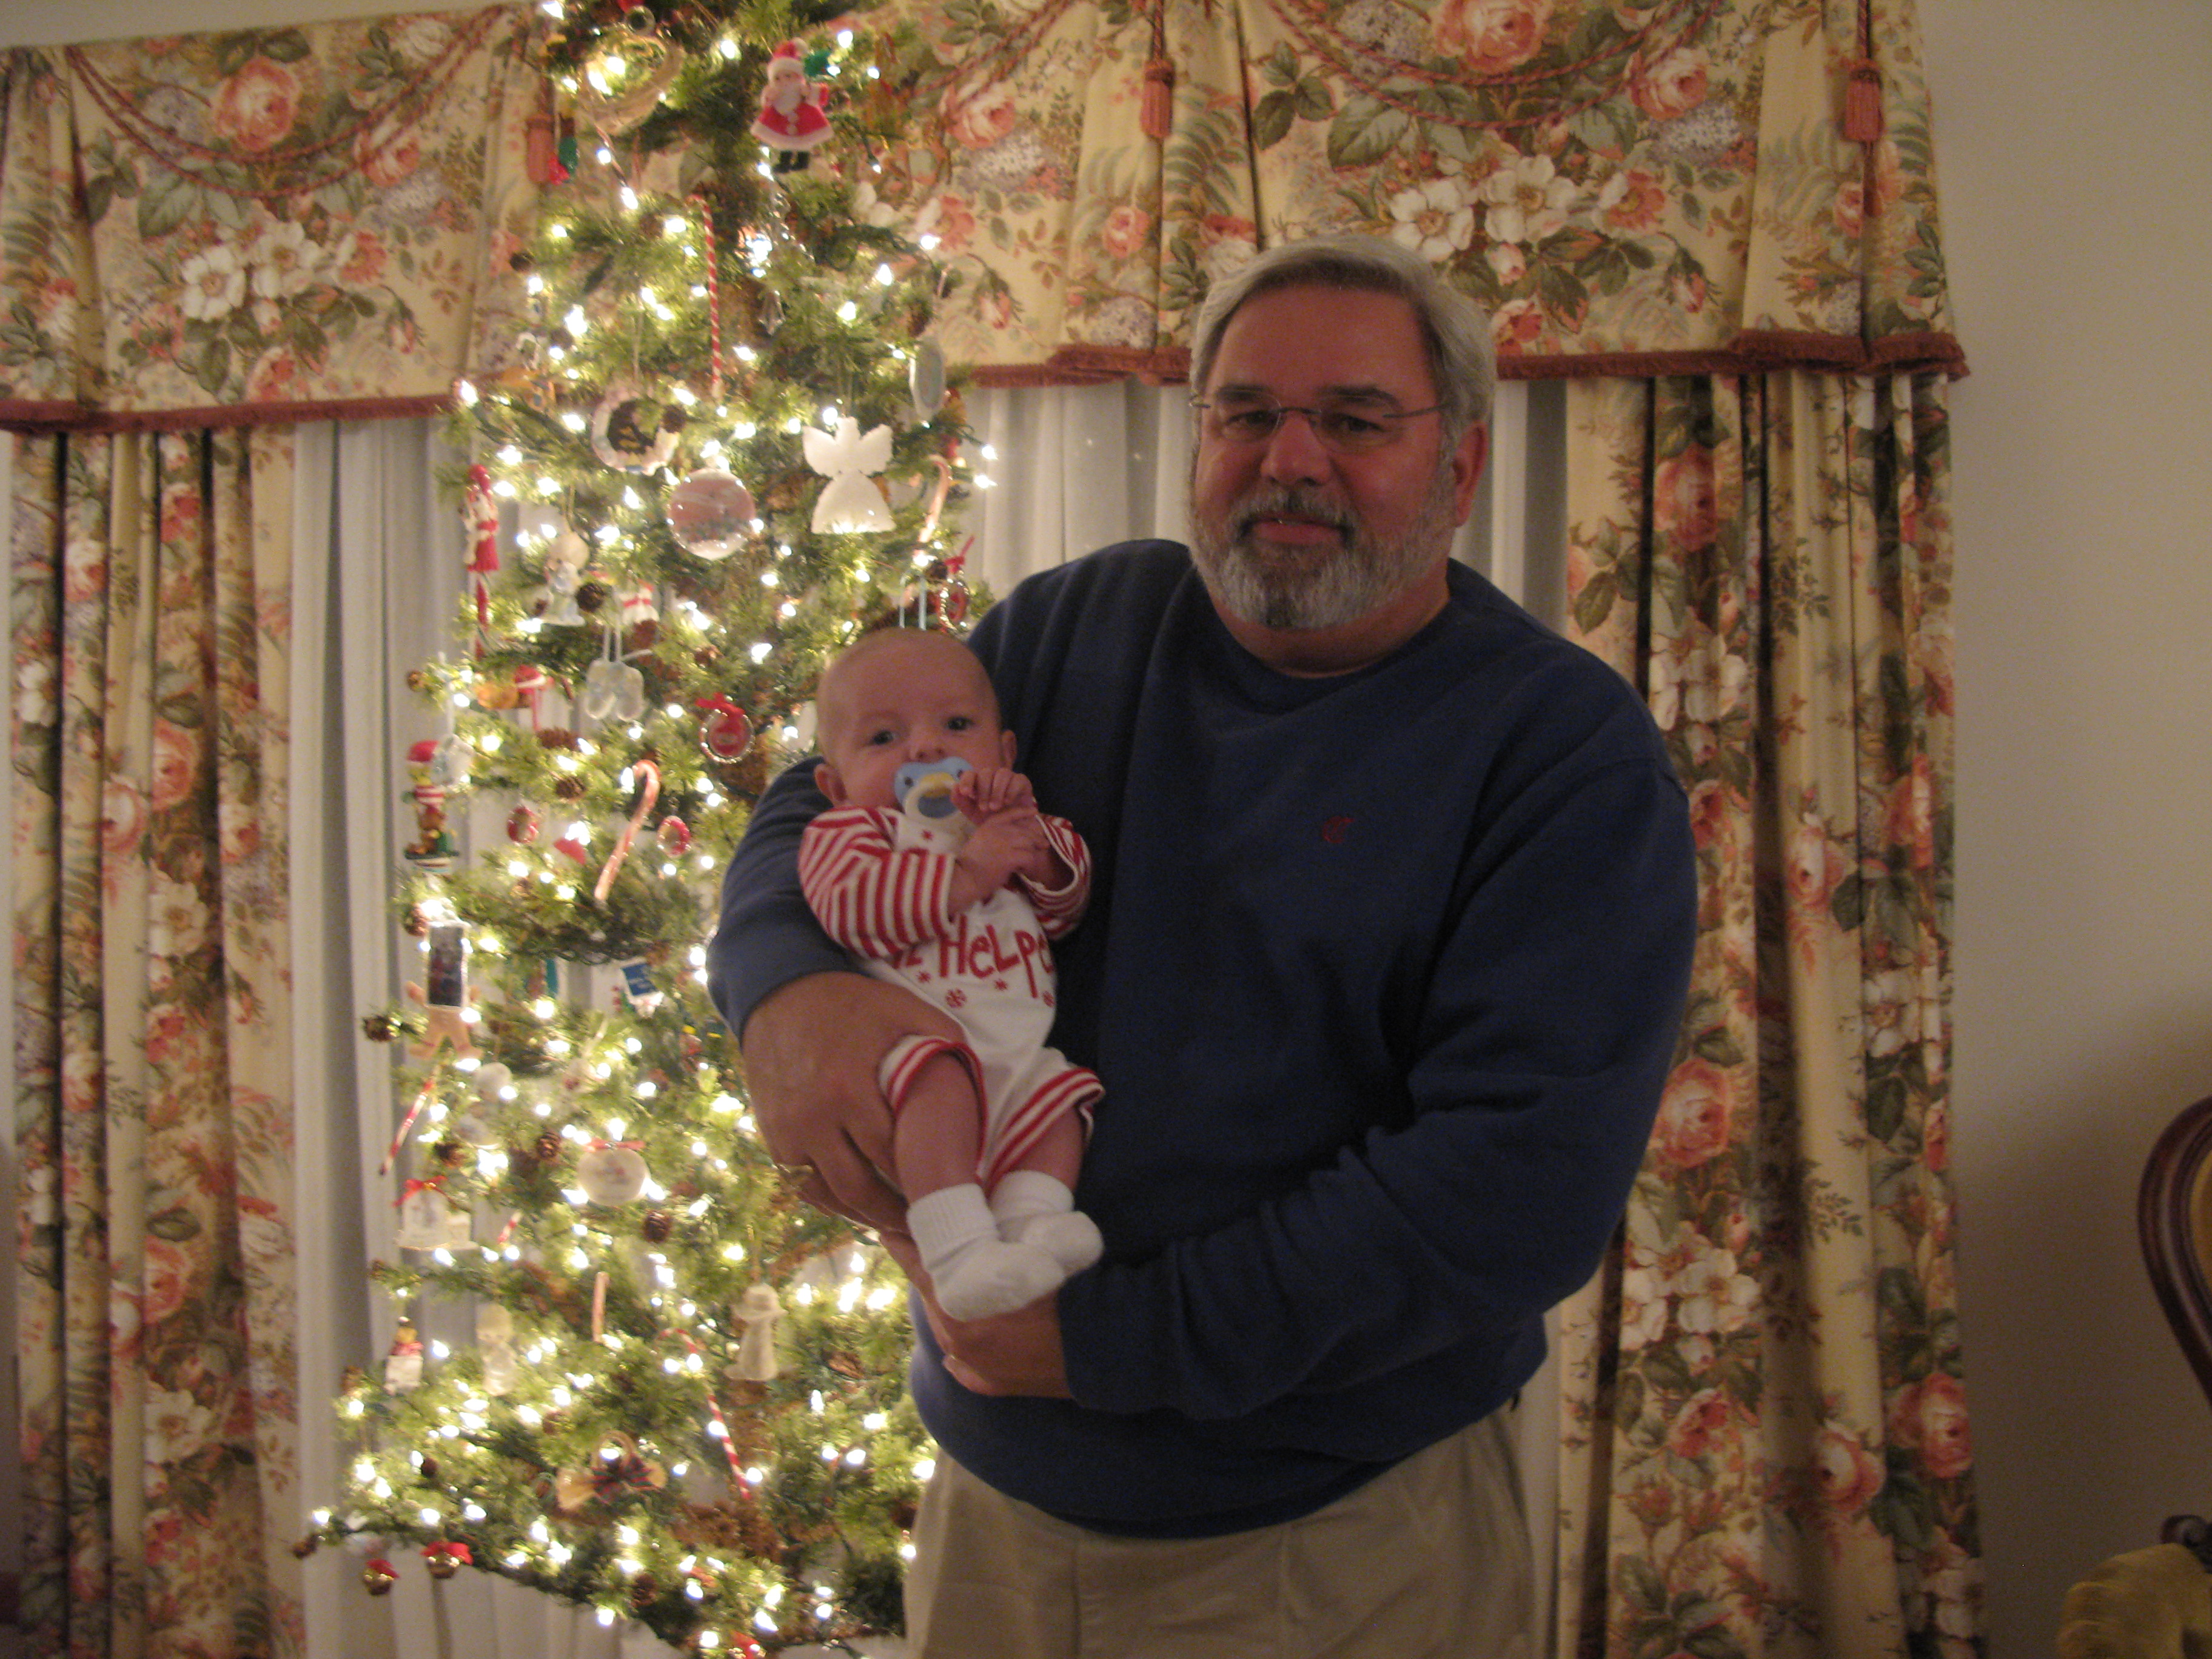 Pappy and Owen